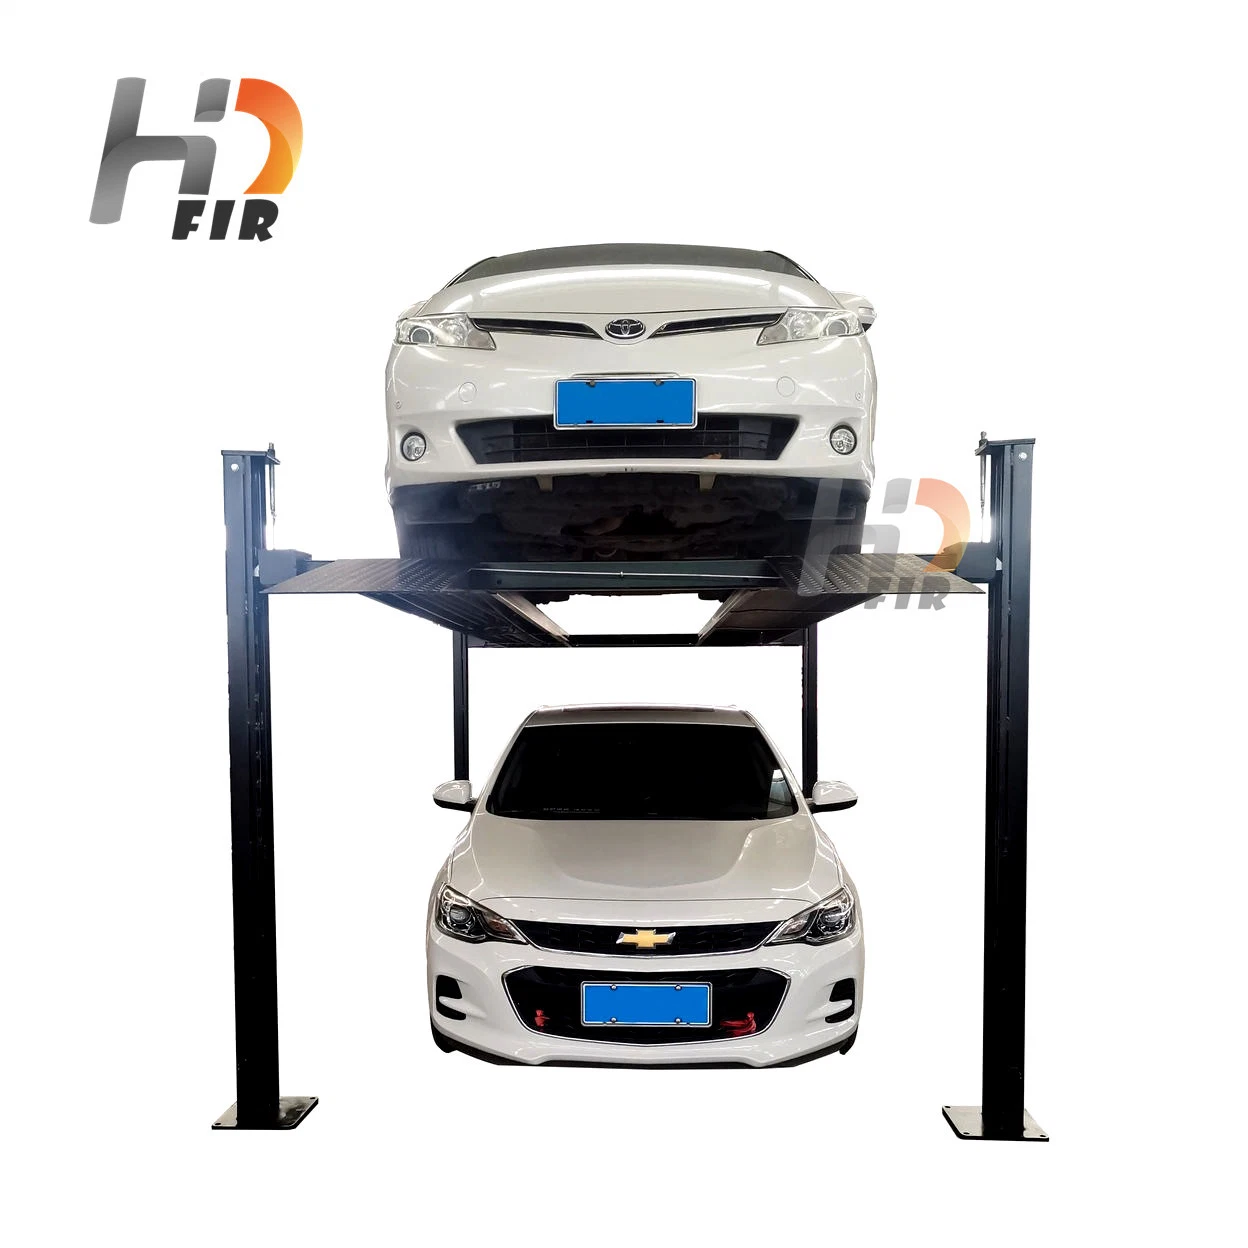 Types of Car Parking System Lift Car Parking System Smart Auto Hydraulic Parking System Germany Design Mechanical Parking Equipment Garage Elevator